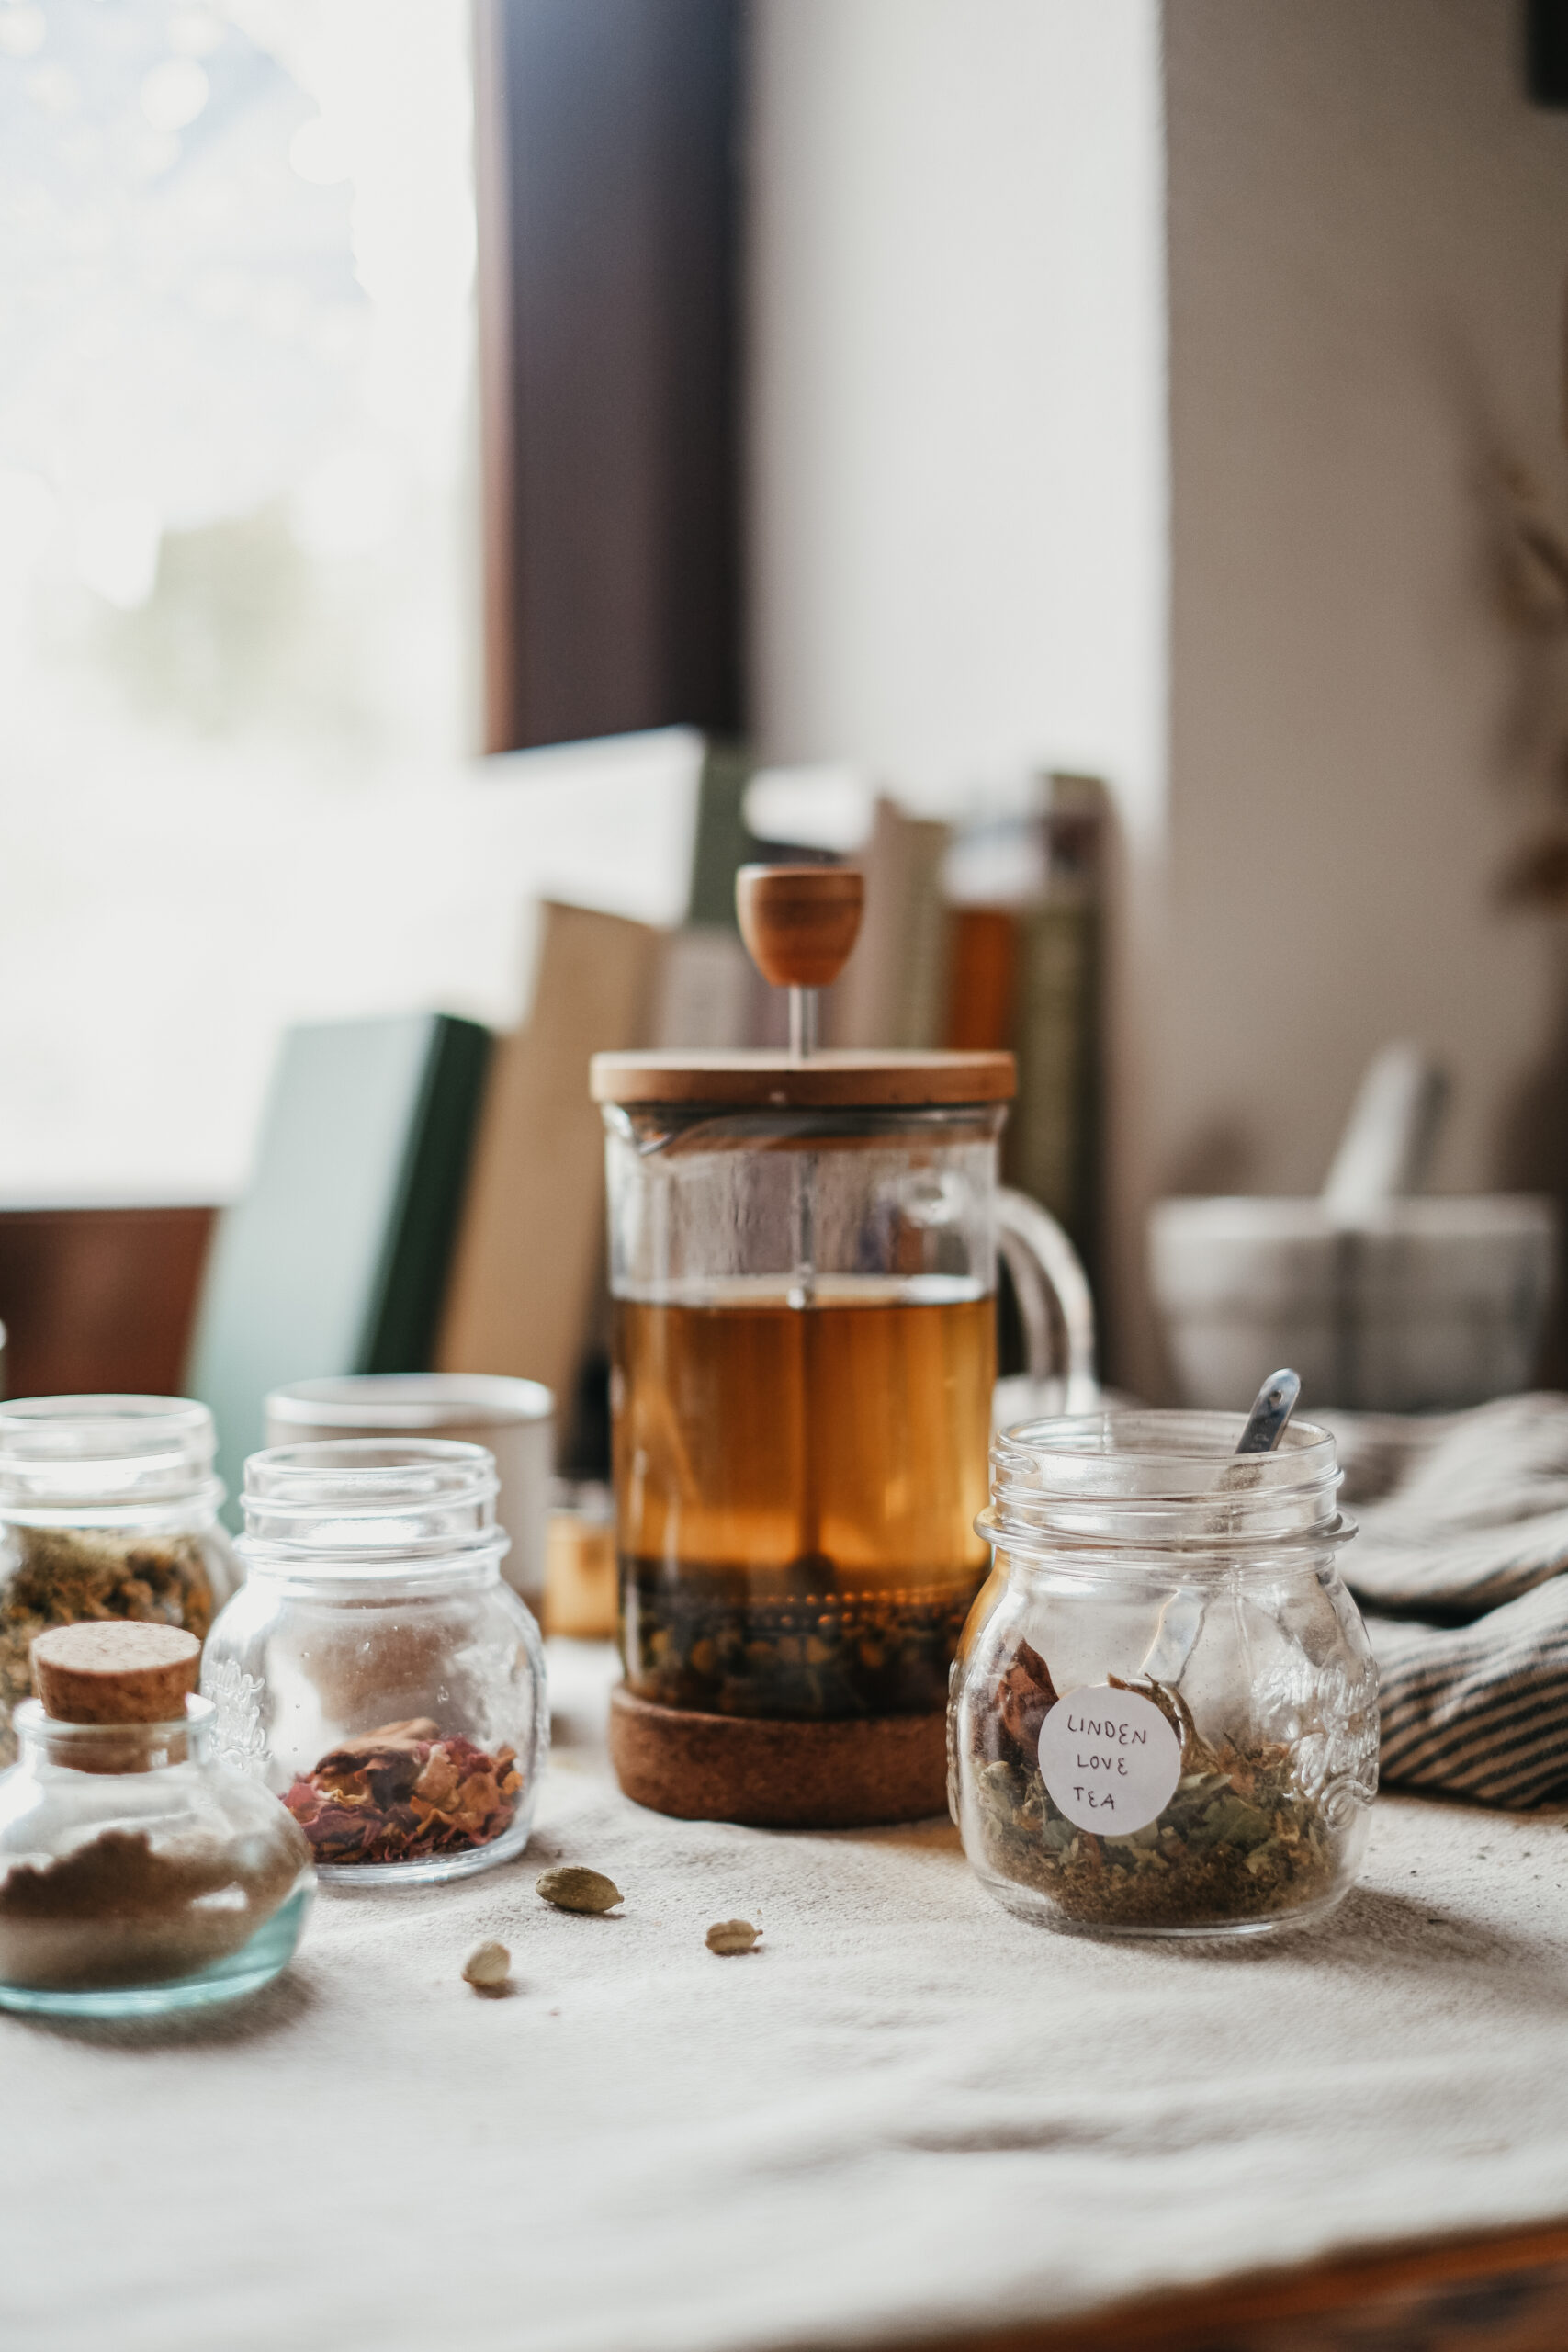 brewing Linden Love Tea in a french press with jars of dried herbs on a tablecloth